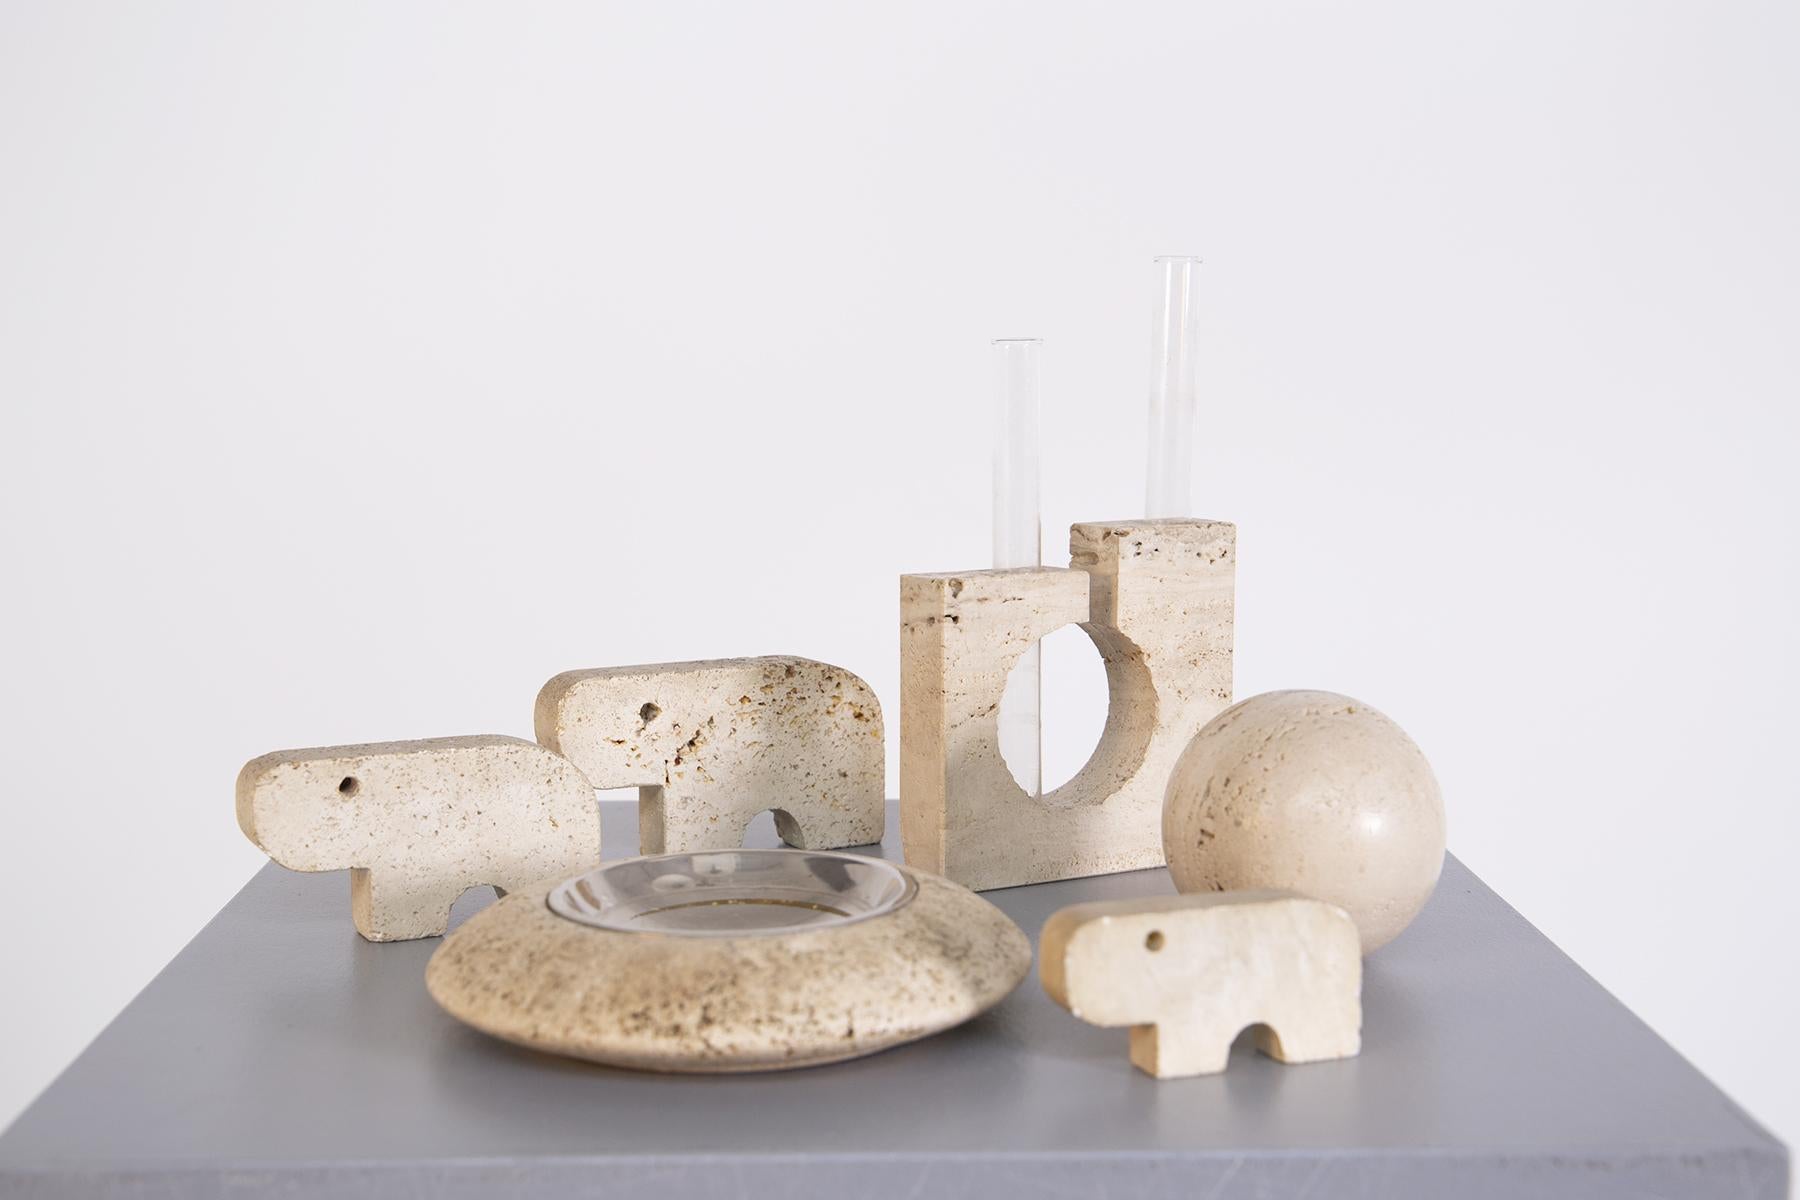 Decorative set by Enzo Mari made of travertine from the 1970s.
The set consists of three animal-shaped sculptures, an ashtray made of travertine and steel, a flower holder also made of travertine with two glass ampoules for placing two flowers